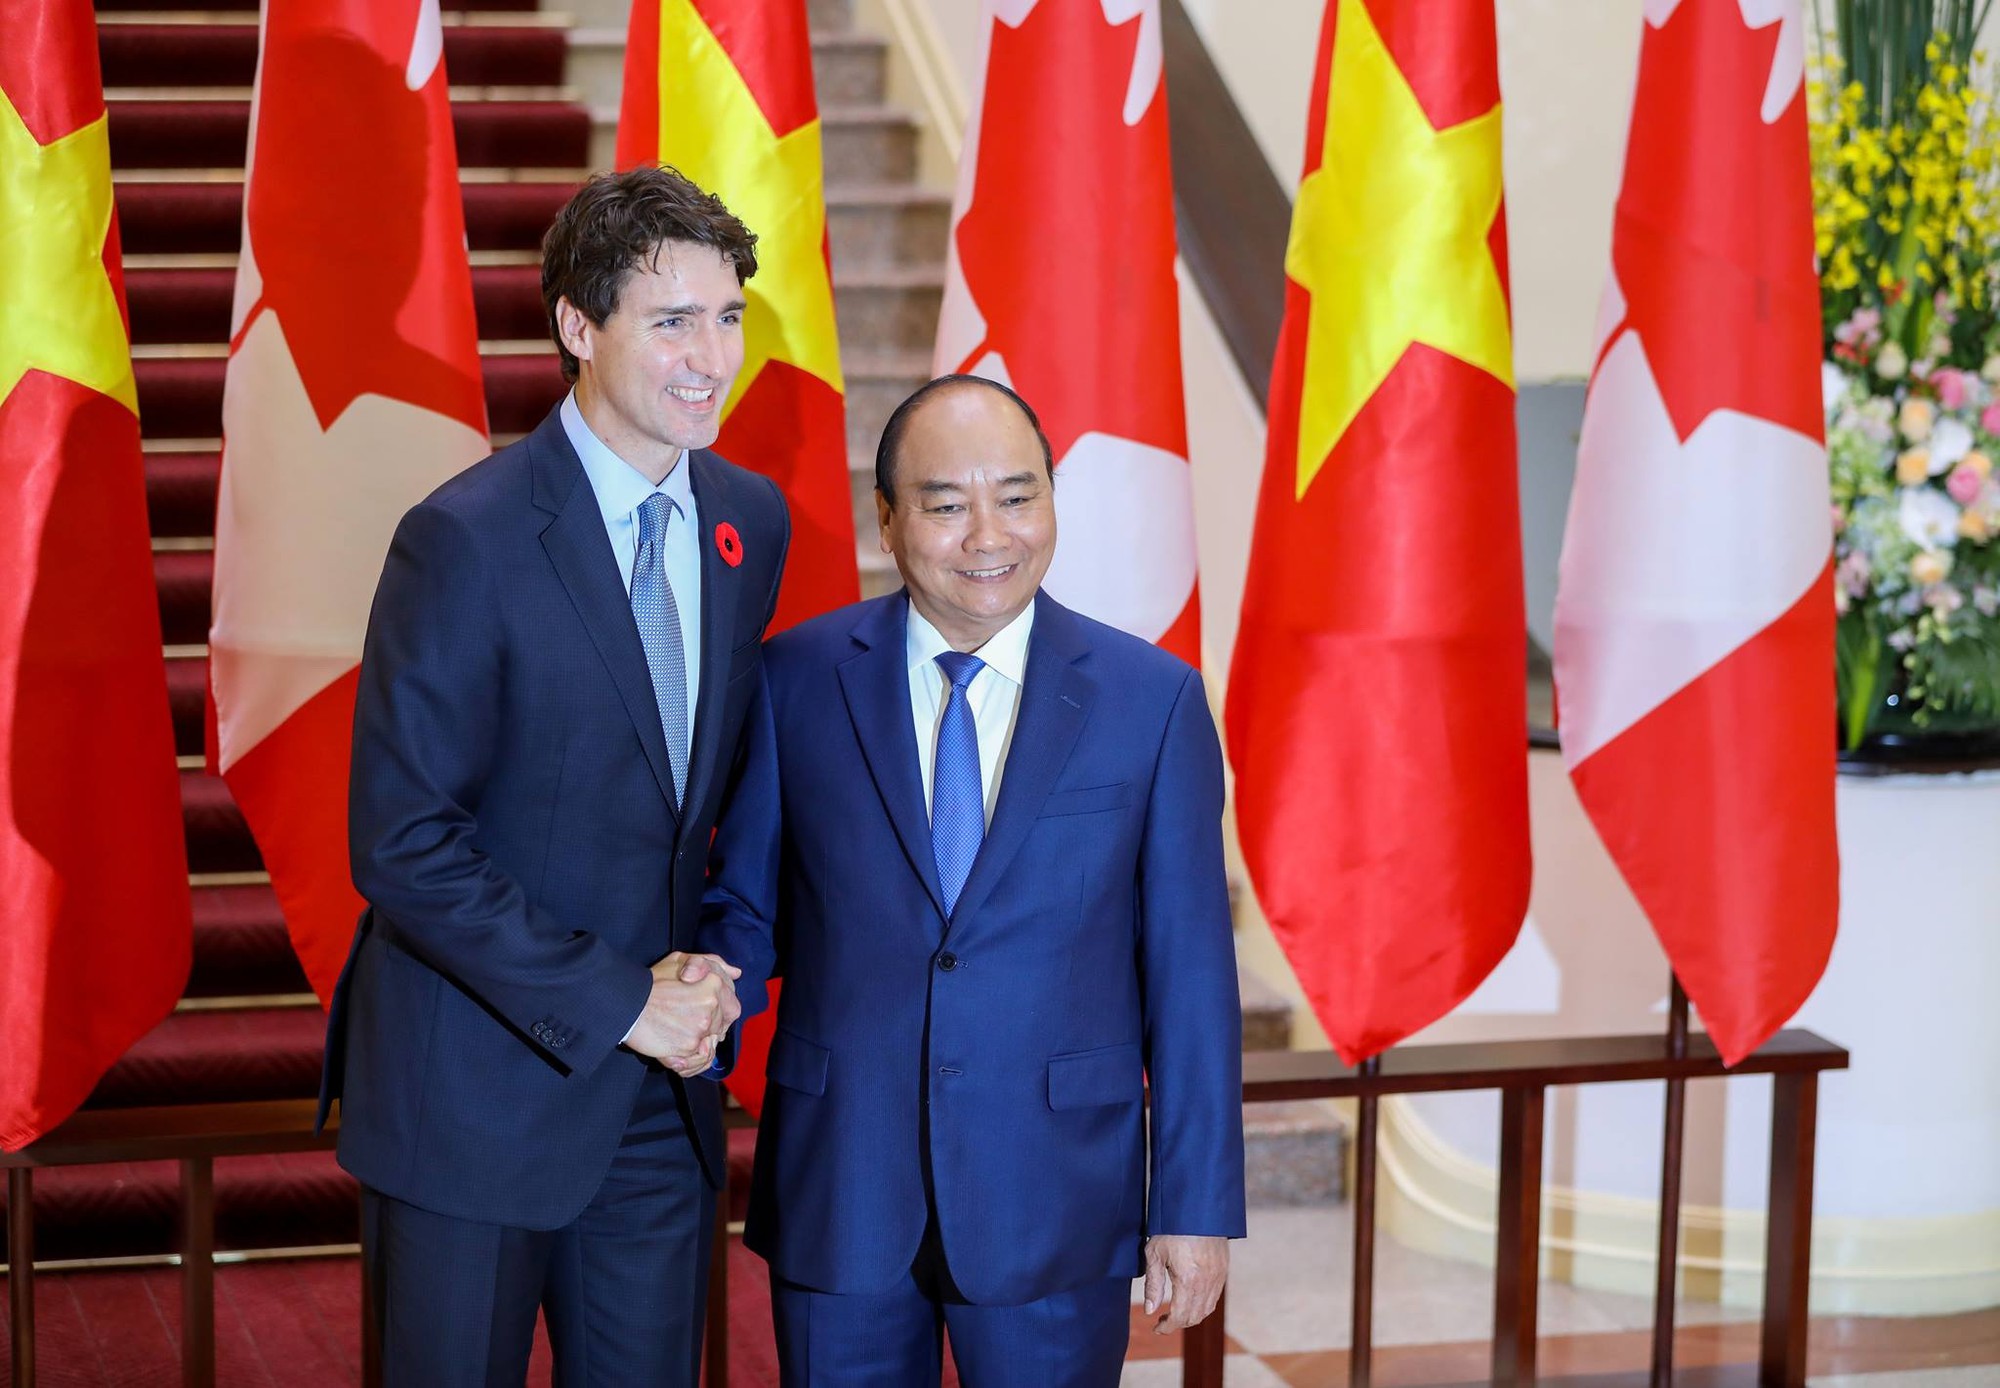 PM Phuc and PM Trudeau shakes hands at the welcome ceremony at the Presidential Palace. Photo: Tuoi Tre